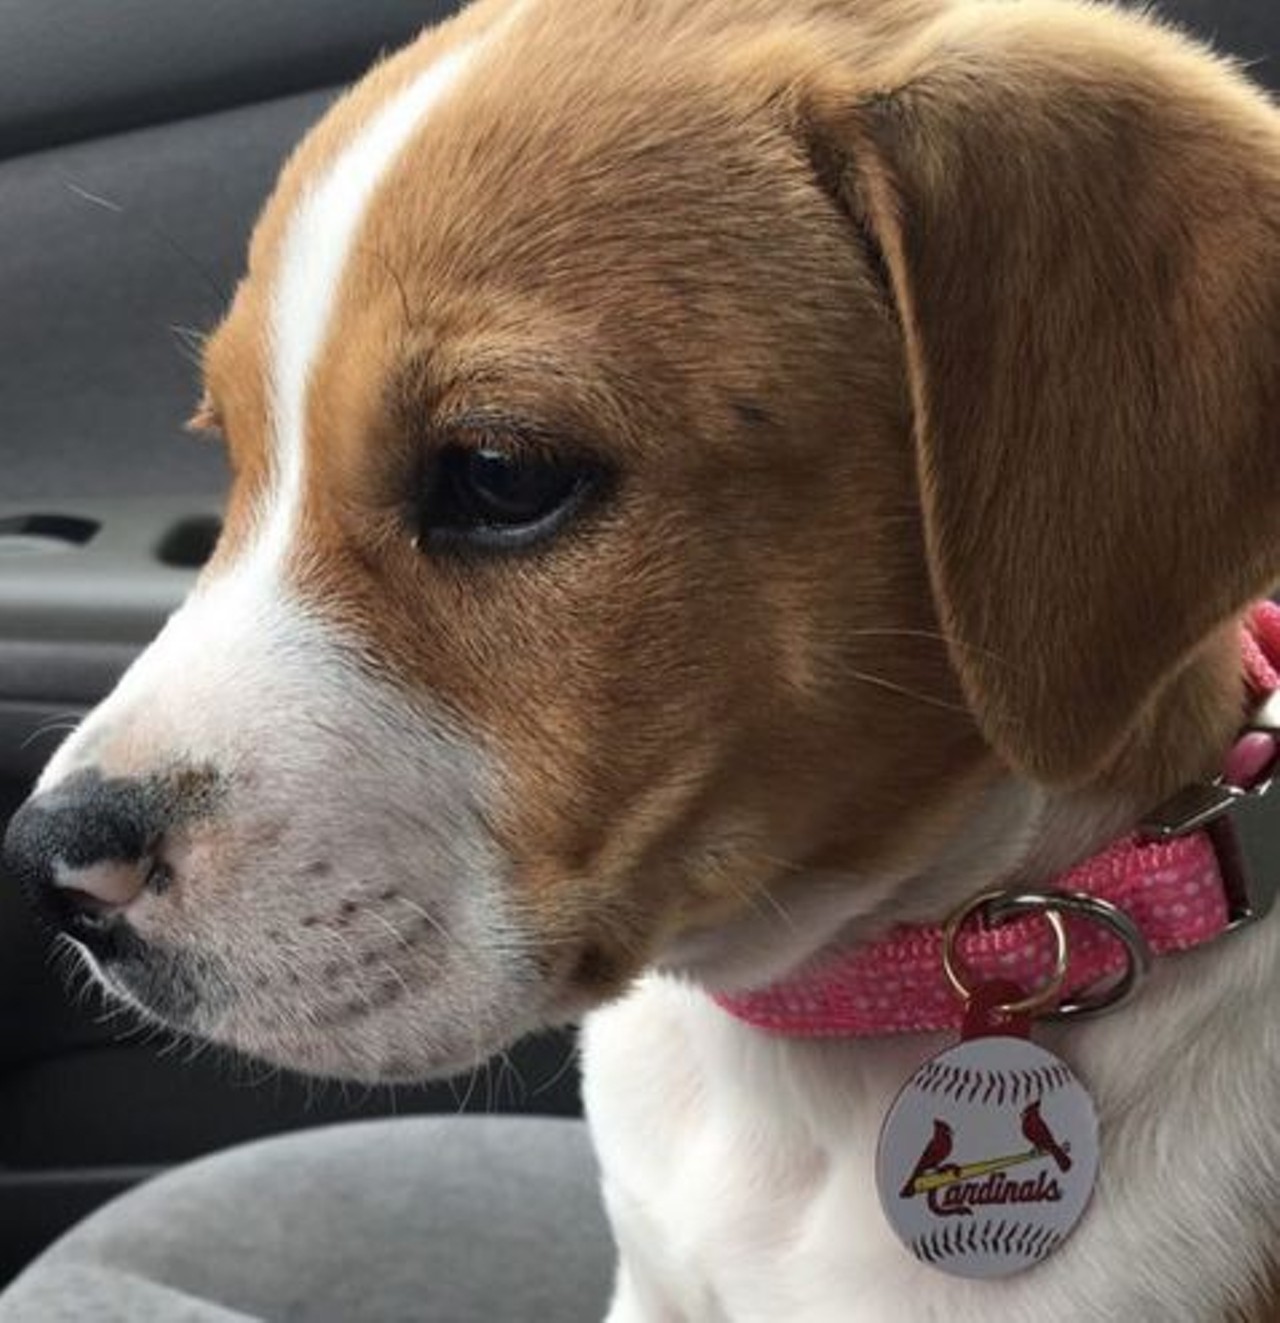 The collar of all collars. Photo courtesy of Instagram / joleigh_love.